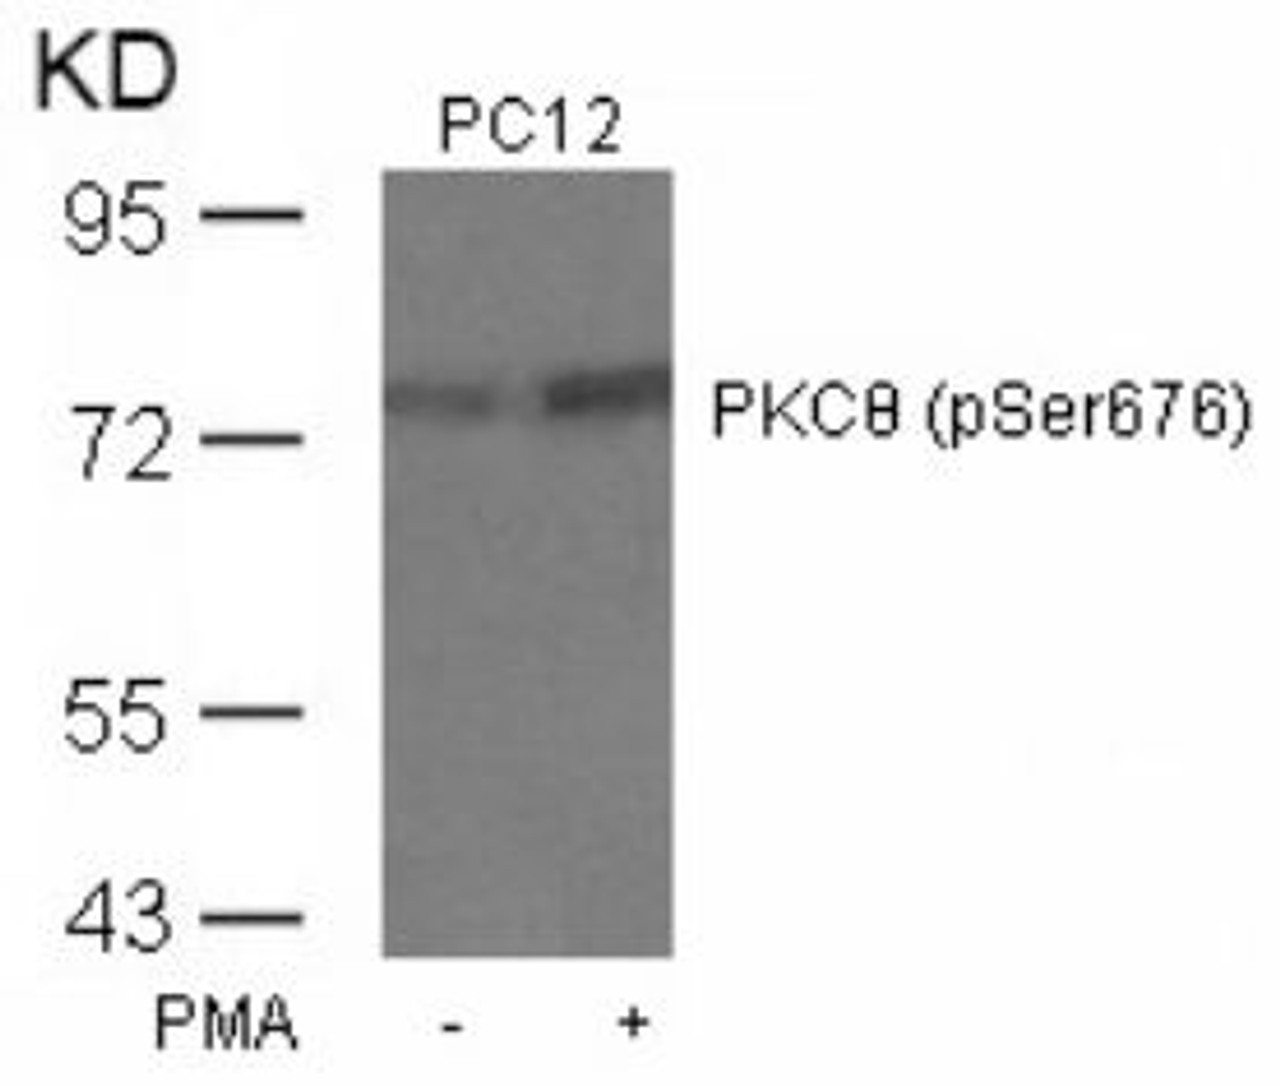 Western blot analysis of lysed extracts from PC12 cells untreated or treated with PMA using PKC&#920; (Phospho-Ser676) .